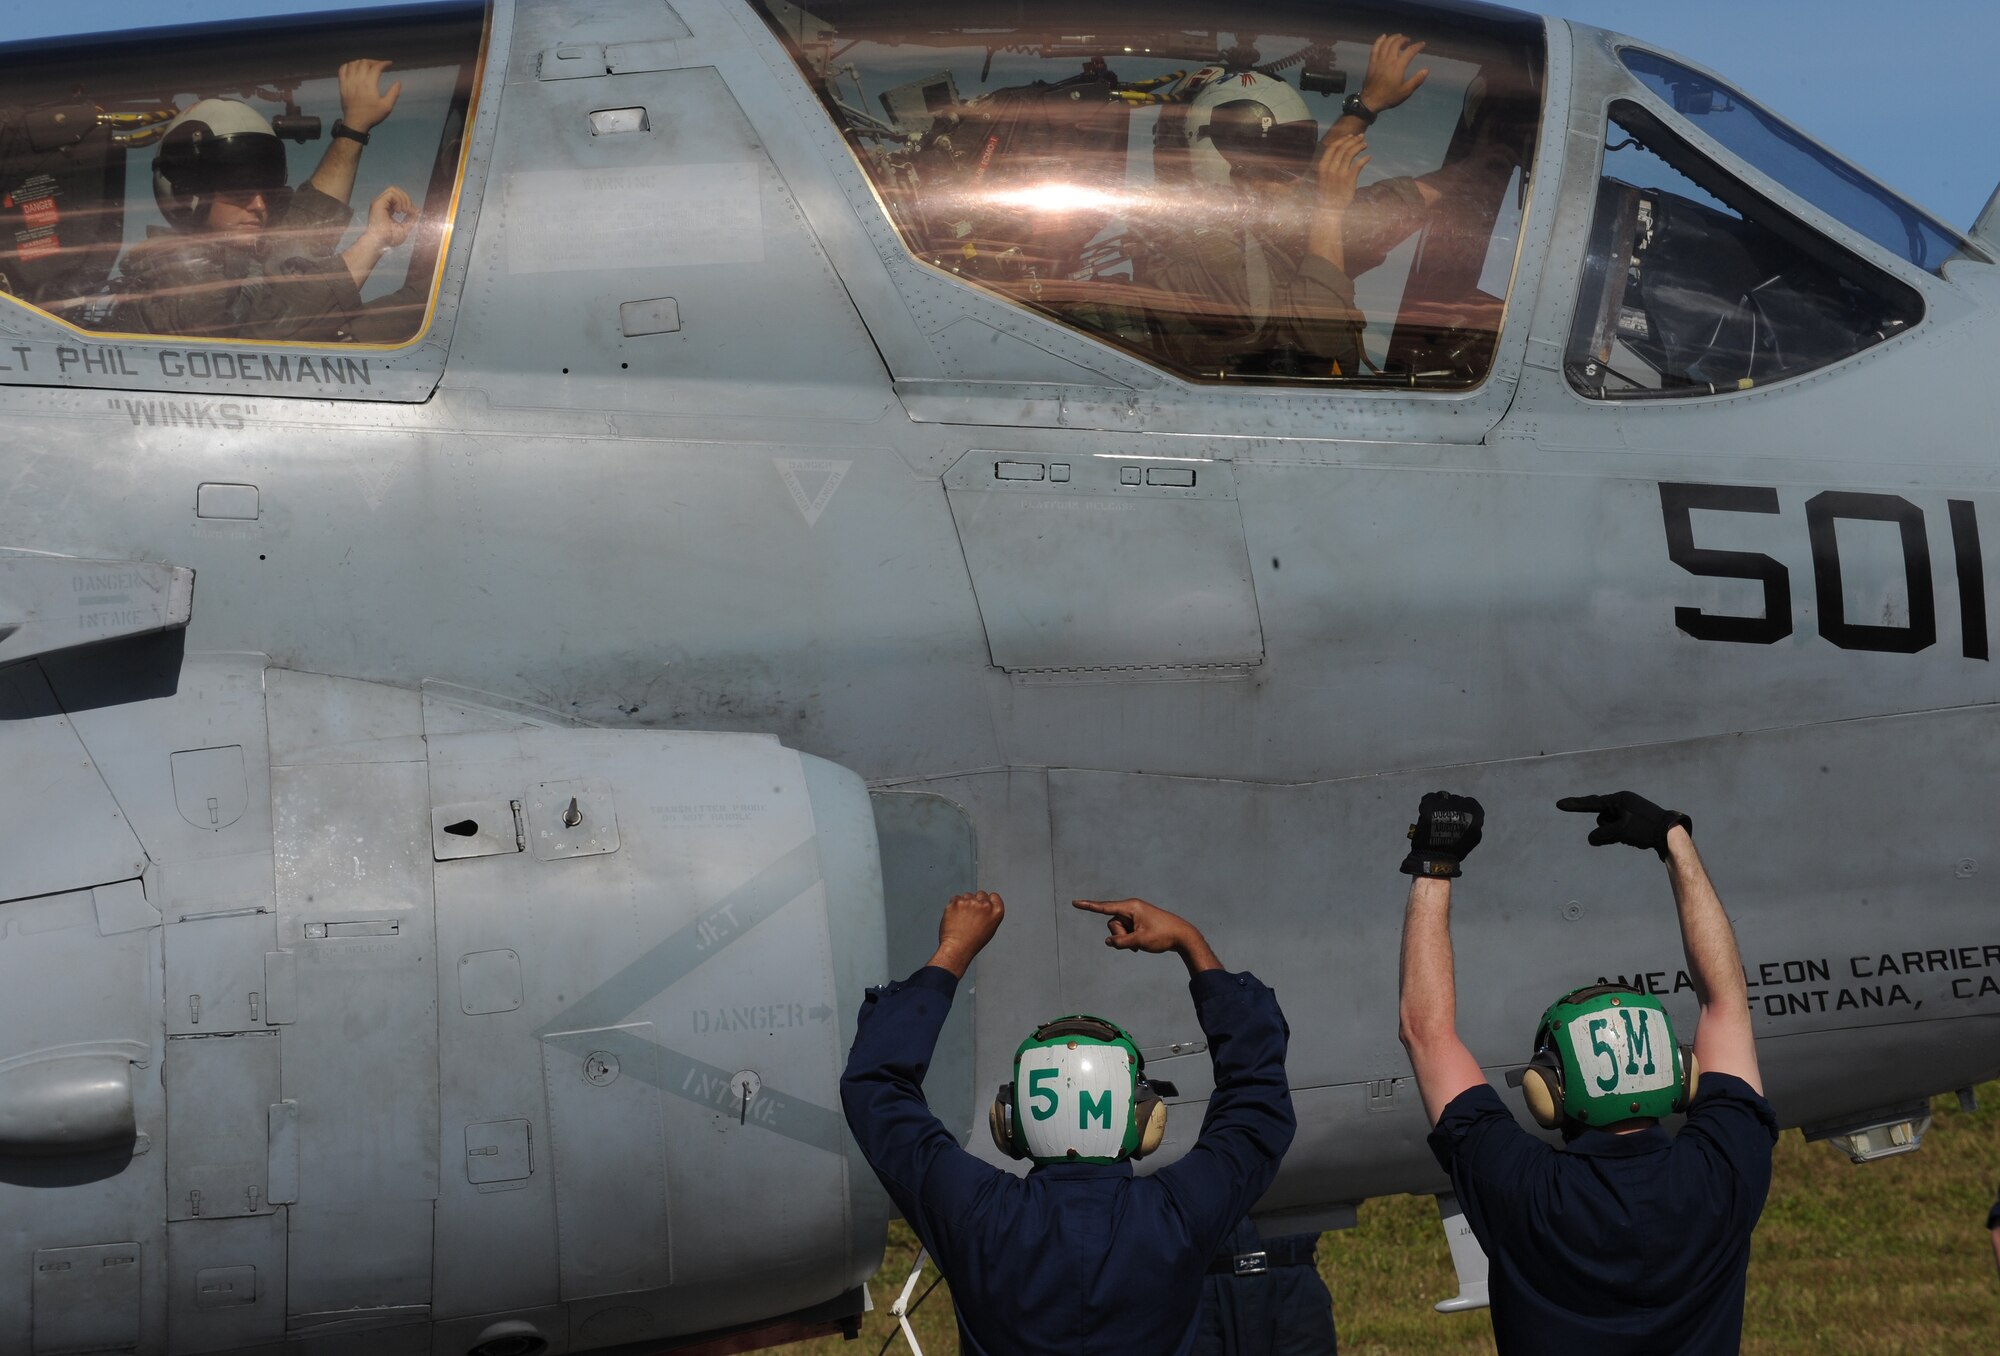 Petty Officer's 3rd Class (left) Timothy Kingery and Roger Sollick both U.S. Navy aviation mates signal to aircrew during a EA-6B Prowler launch, Feb. 3 at Andersen Air Force Base, Guam prior to a local area mission during exercise Cope North 09-1. Navy EA-6B Prowlers from VAQ-136 Carrier Air Wing Five, Atsugi, Japan along with Japan Air Self Defense Force F-2s  from the 6th Squadron, Tsuiki Air Base and E-2Cs from the 601st Squadron, Misawa Air Base will join forward deployed USAF  F-16 Fighting Falcons from the 18th Aggressor Squadron, Eielson Air Force Base, Alaska, B-52 Stratofortress' currently deployed to Andersen AFB, Guam from the 23rd Expeditionary Bomb Squadron will participate in this year's Cope North exercise Feb. 2-13. Cope North 09-1 is the first iteration of a regularly scheduled joint and bilateral exercise and is part of the on-going series of exercises designed to enhance air operations in defense of Japan. 
 
(U.S. Air Force photo/ Master Sgt. Kevin J. Gruenwald) released





















  












 











































  












 

























